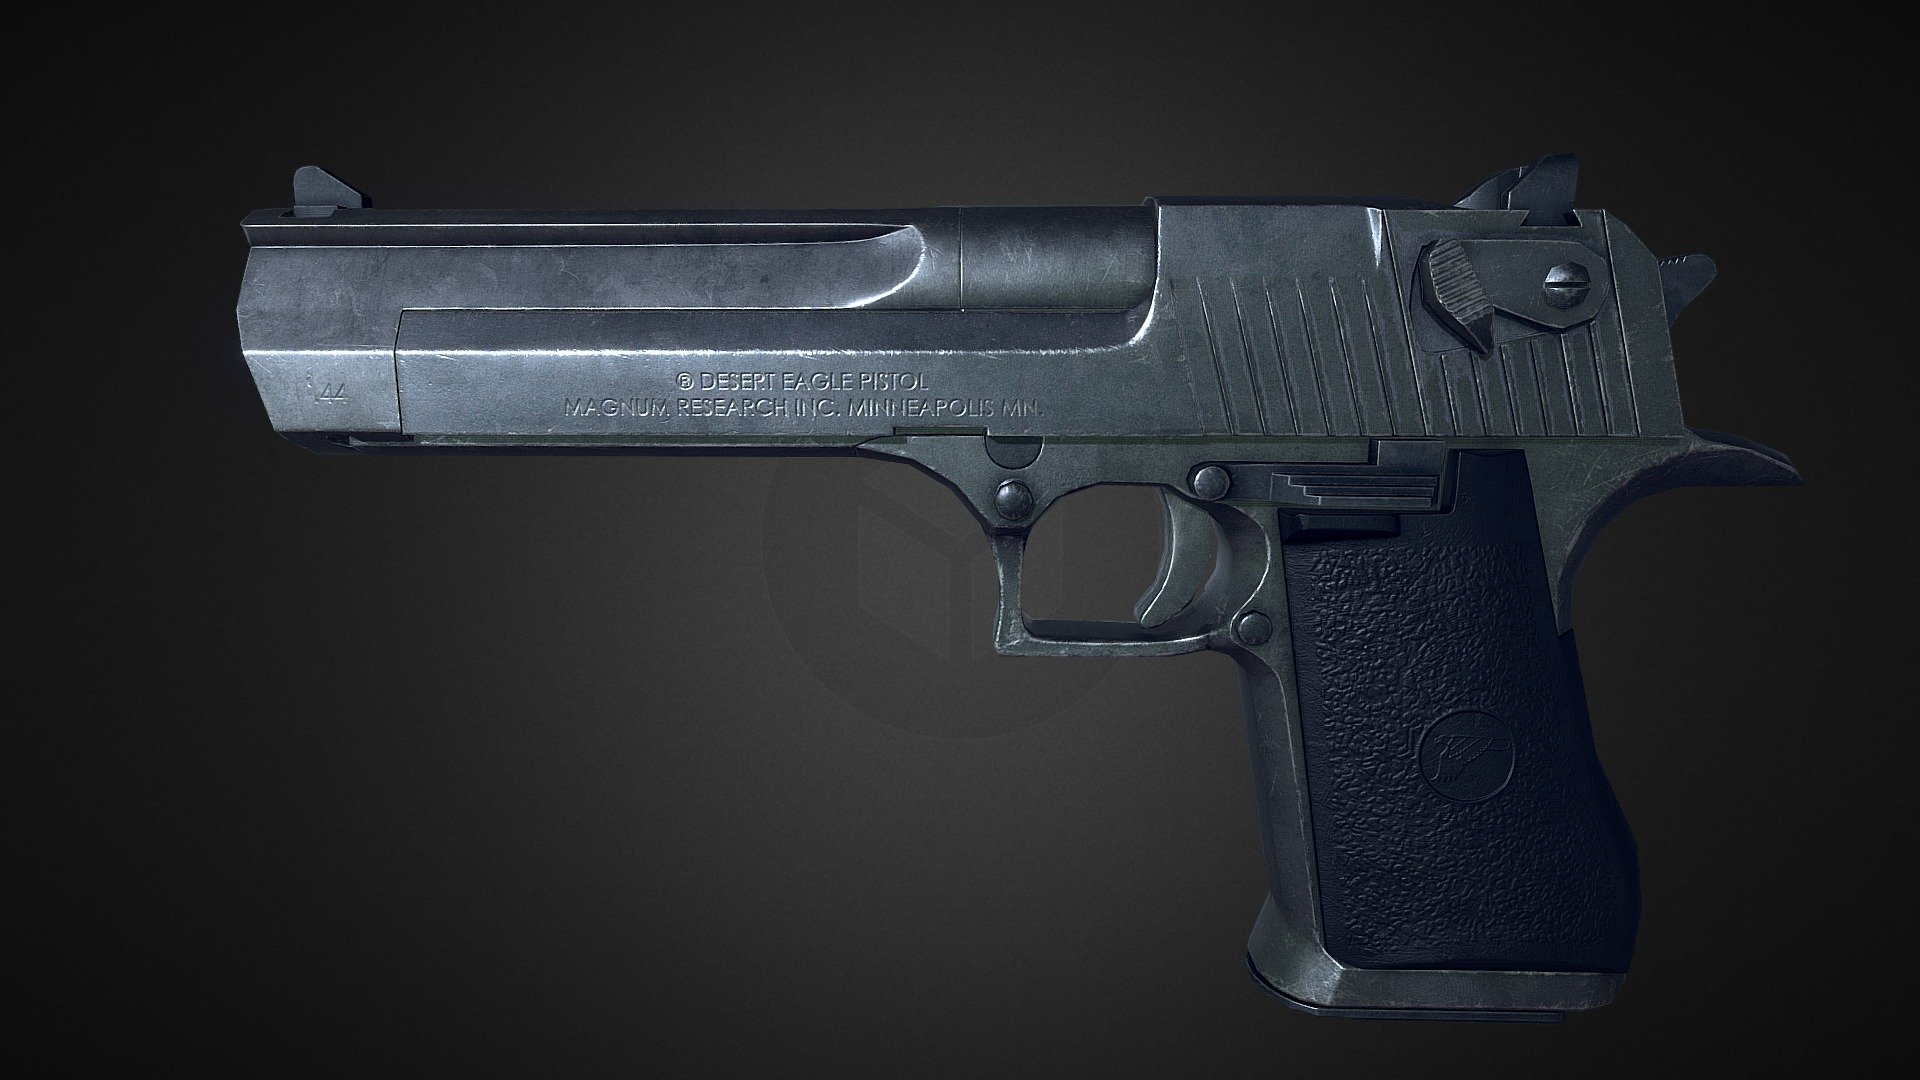 Detailed, low poly gun with realistic, worn metal textures.
The mesh has been split into different object for easy animation. The magazine is modelled and textured as well.

Textured in Substance Painter with the PBR Metal/roughness workflow 3d model